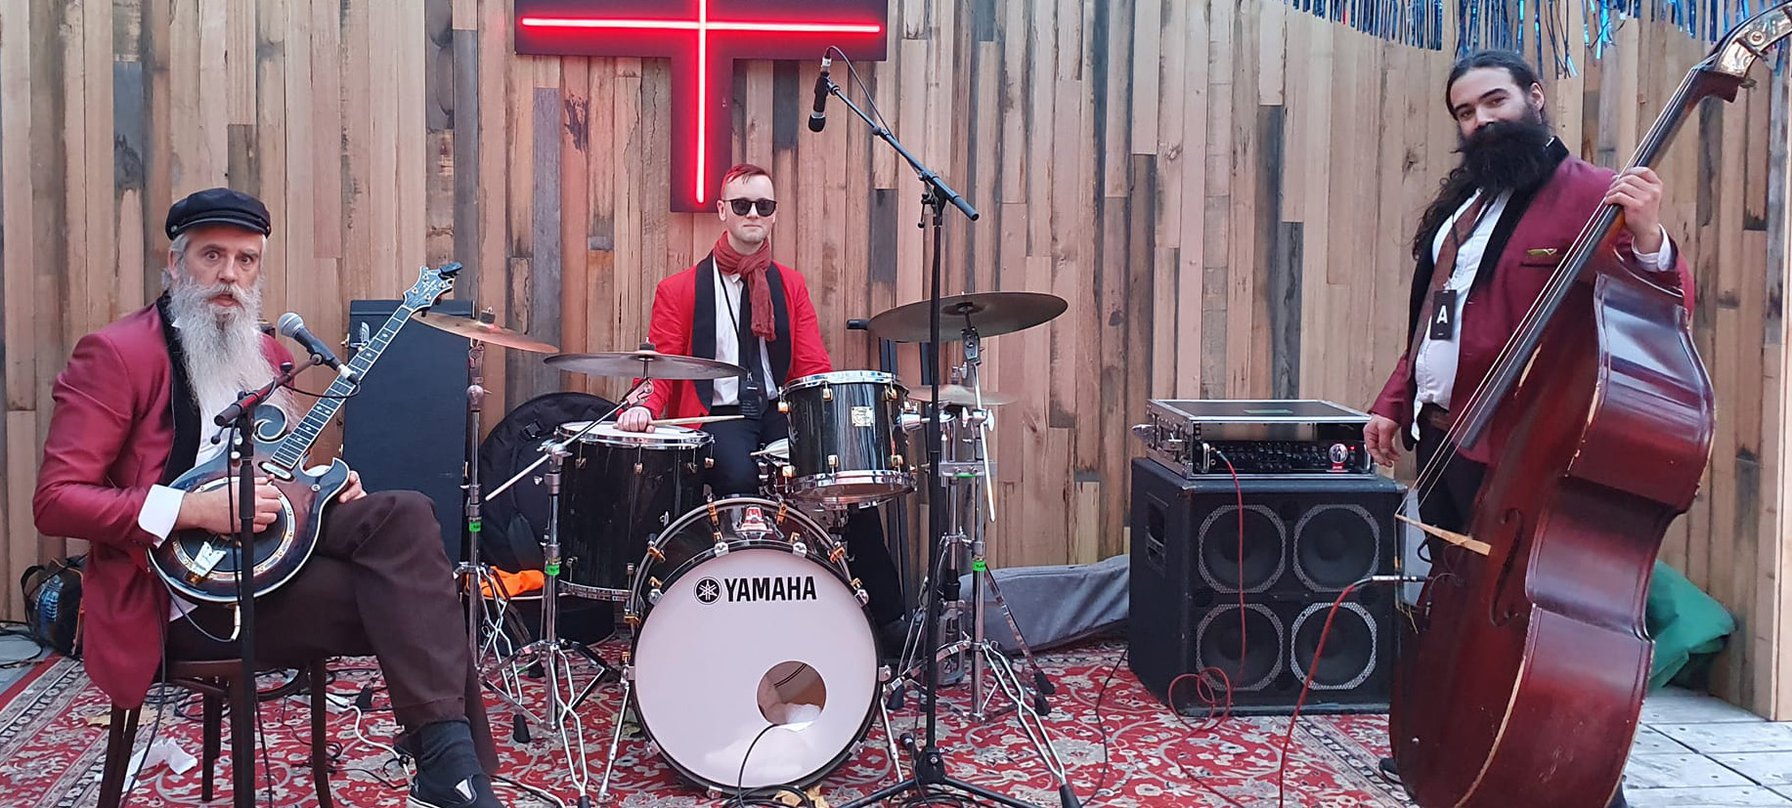 A photo of three people surrounded by musical instruments. A drum kit, electric banjo, double bass and amps can be seen with the musicians who stand on a Persian rug and are all wearing red jackets. Credit